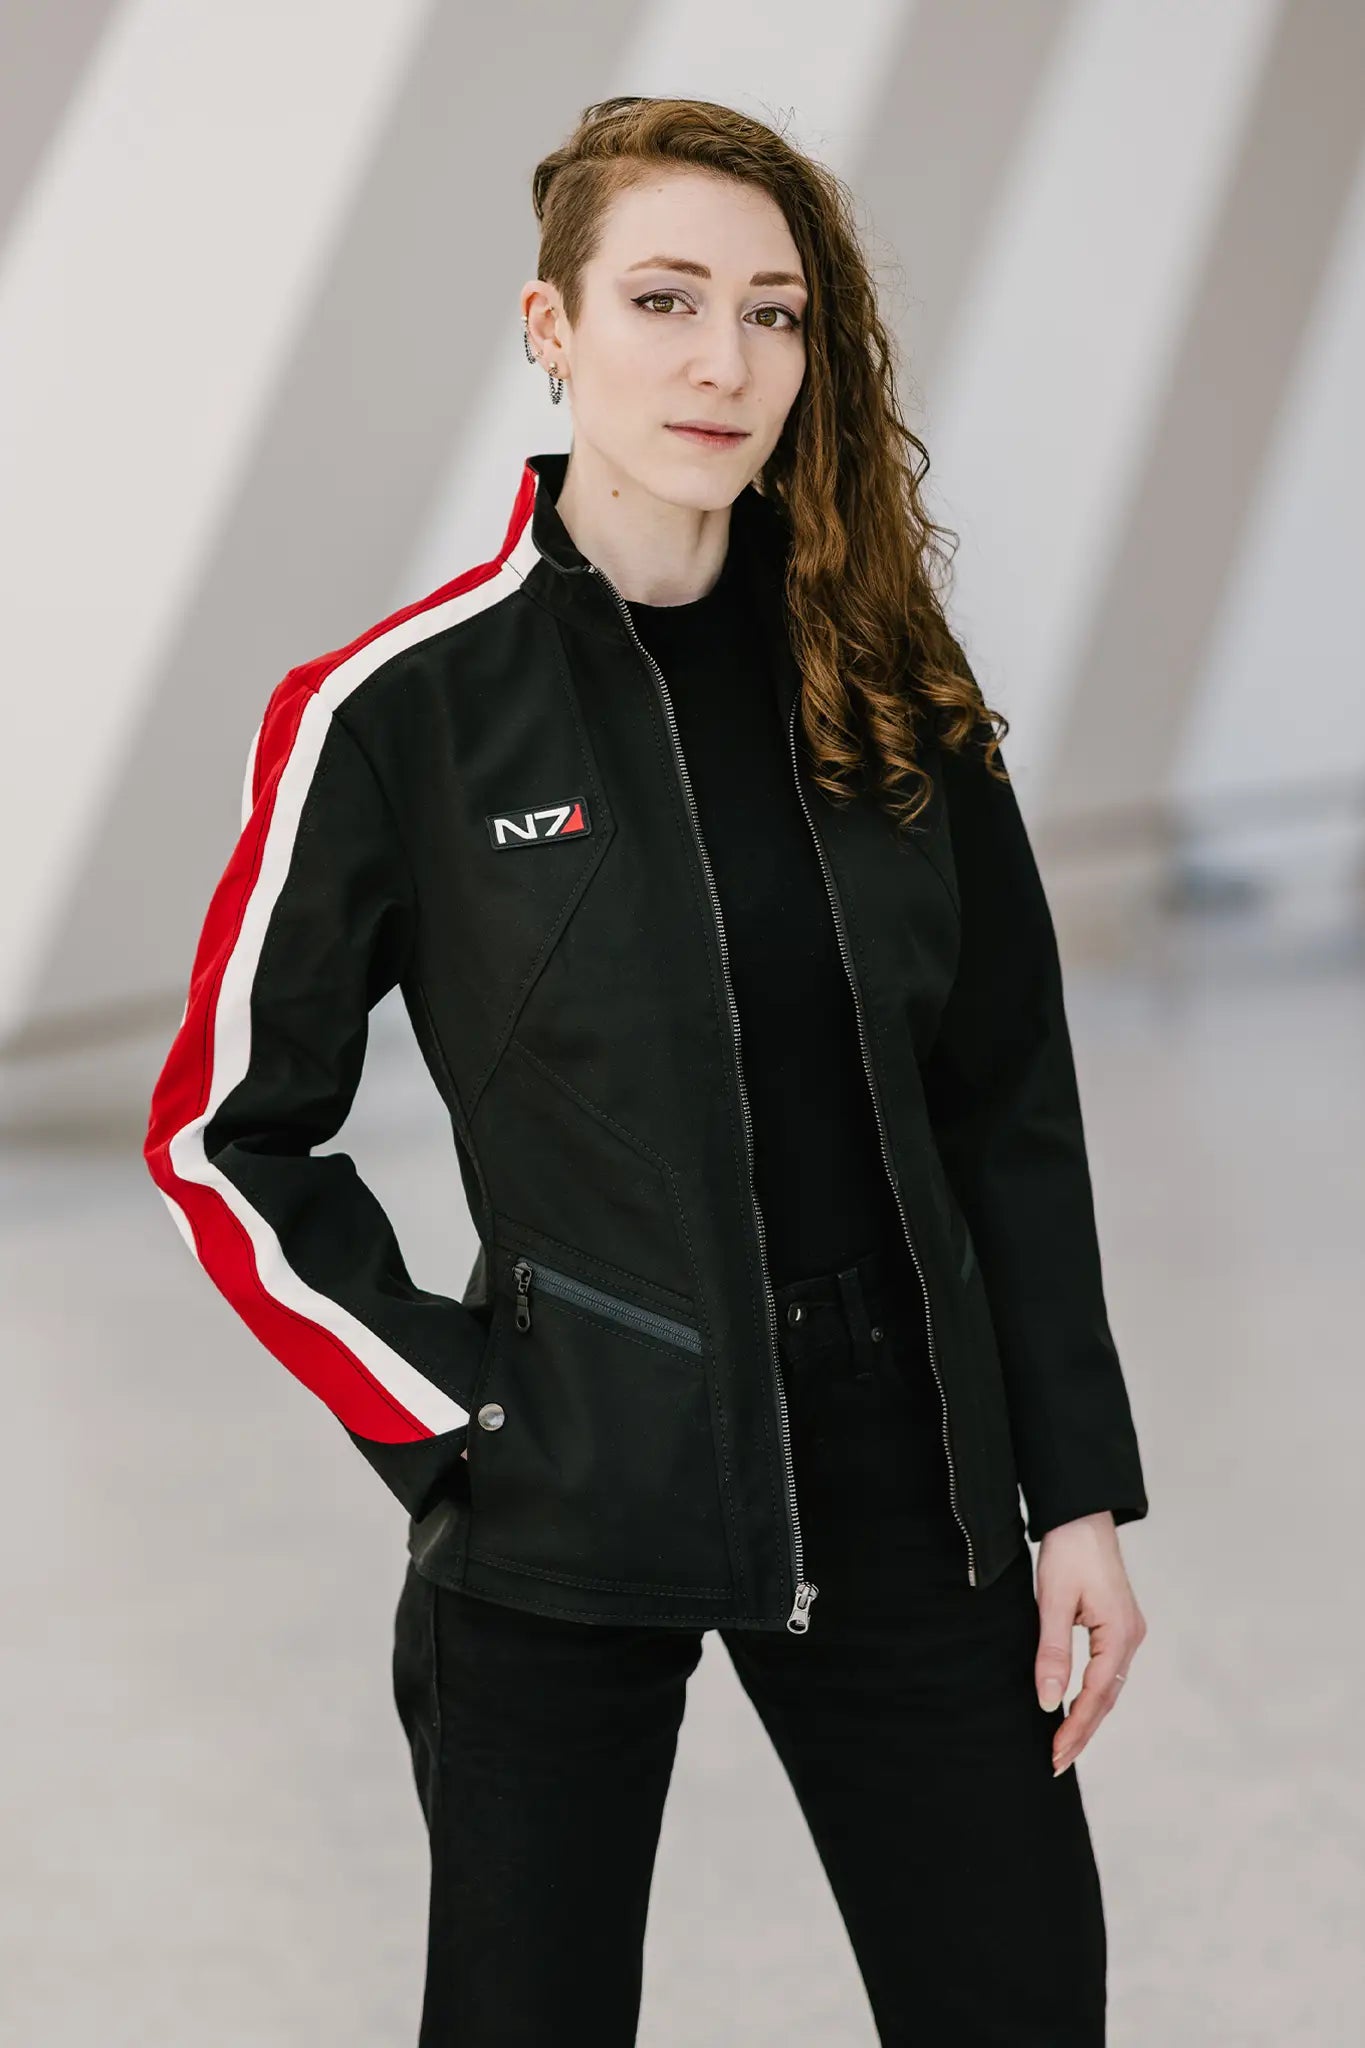 N7 Special Ops Jacket - Spectre [Womens]